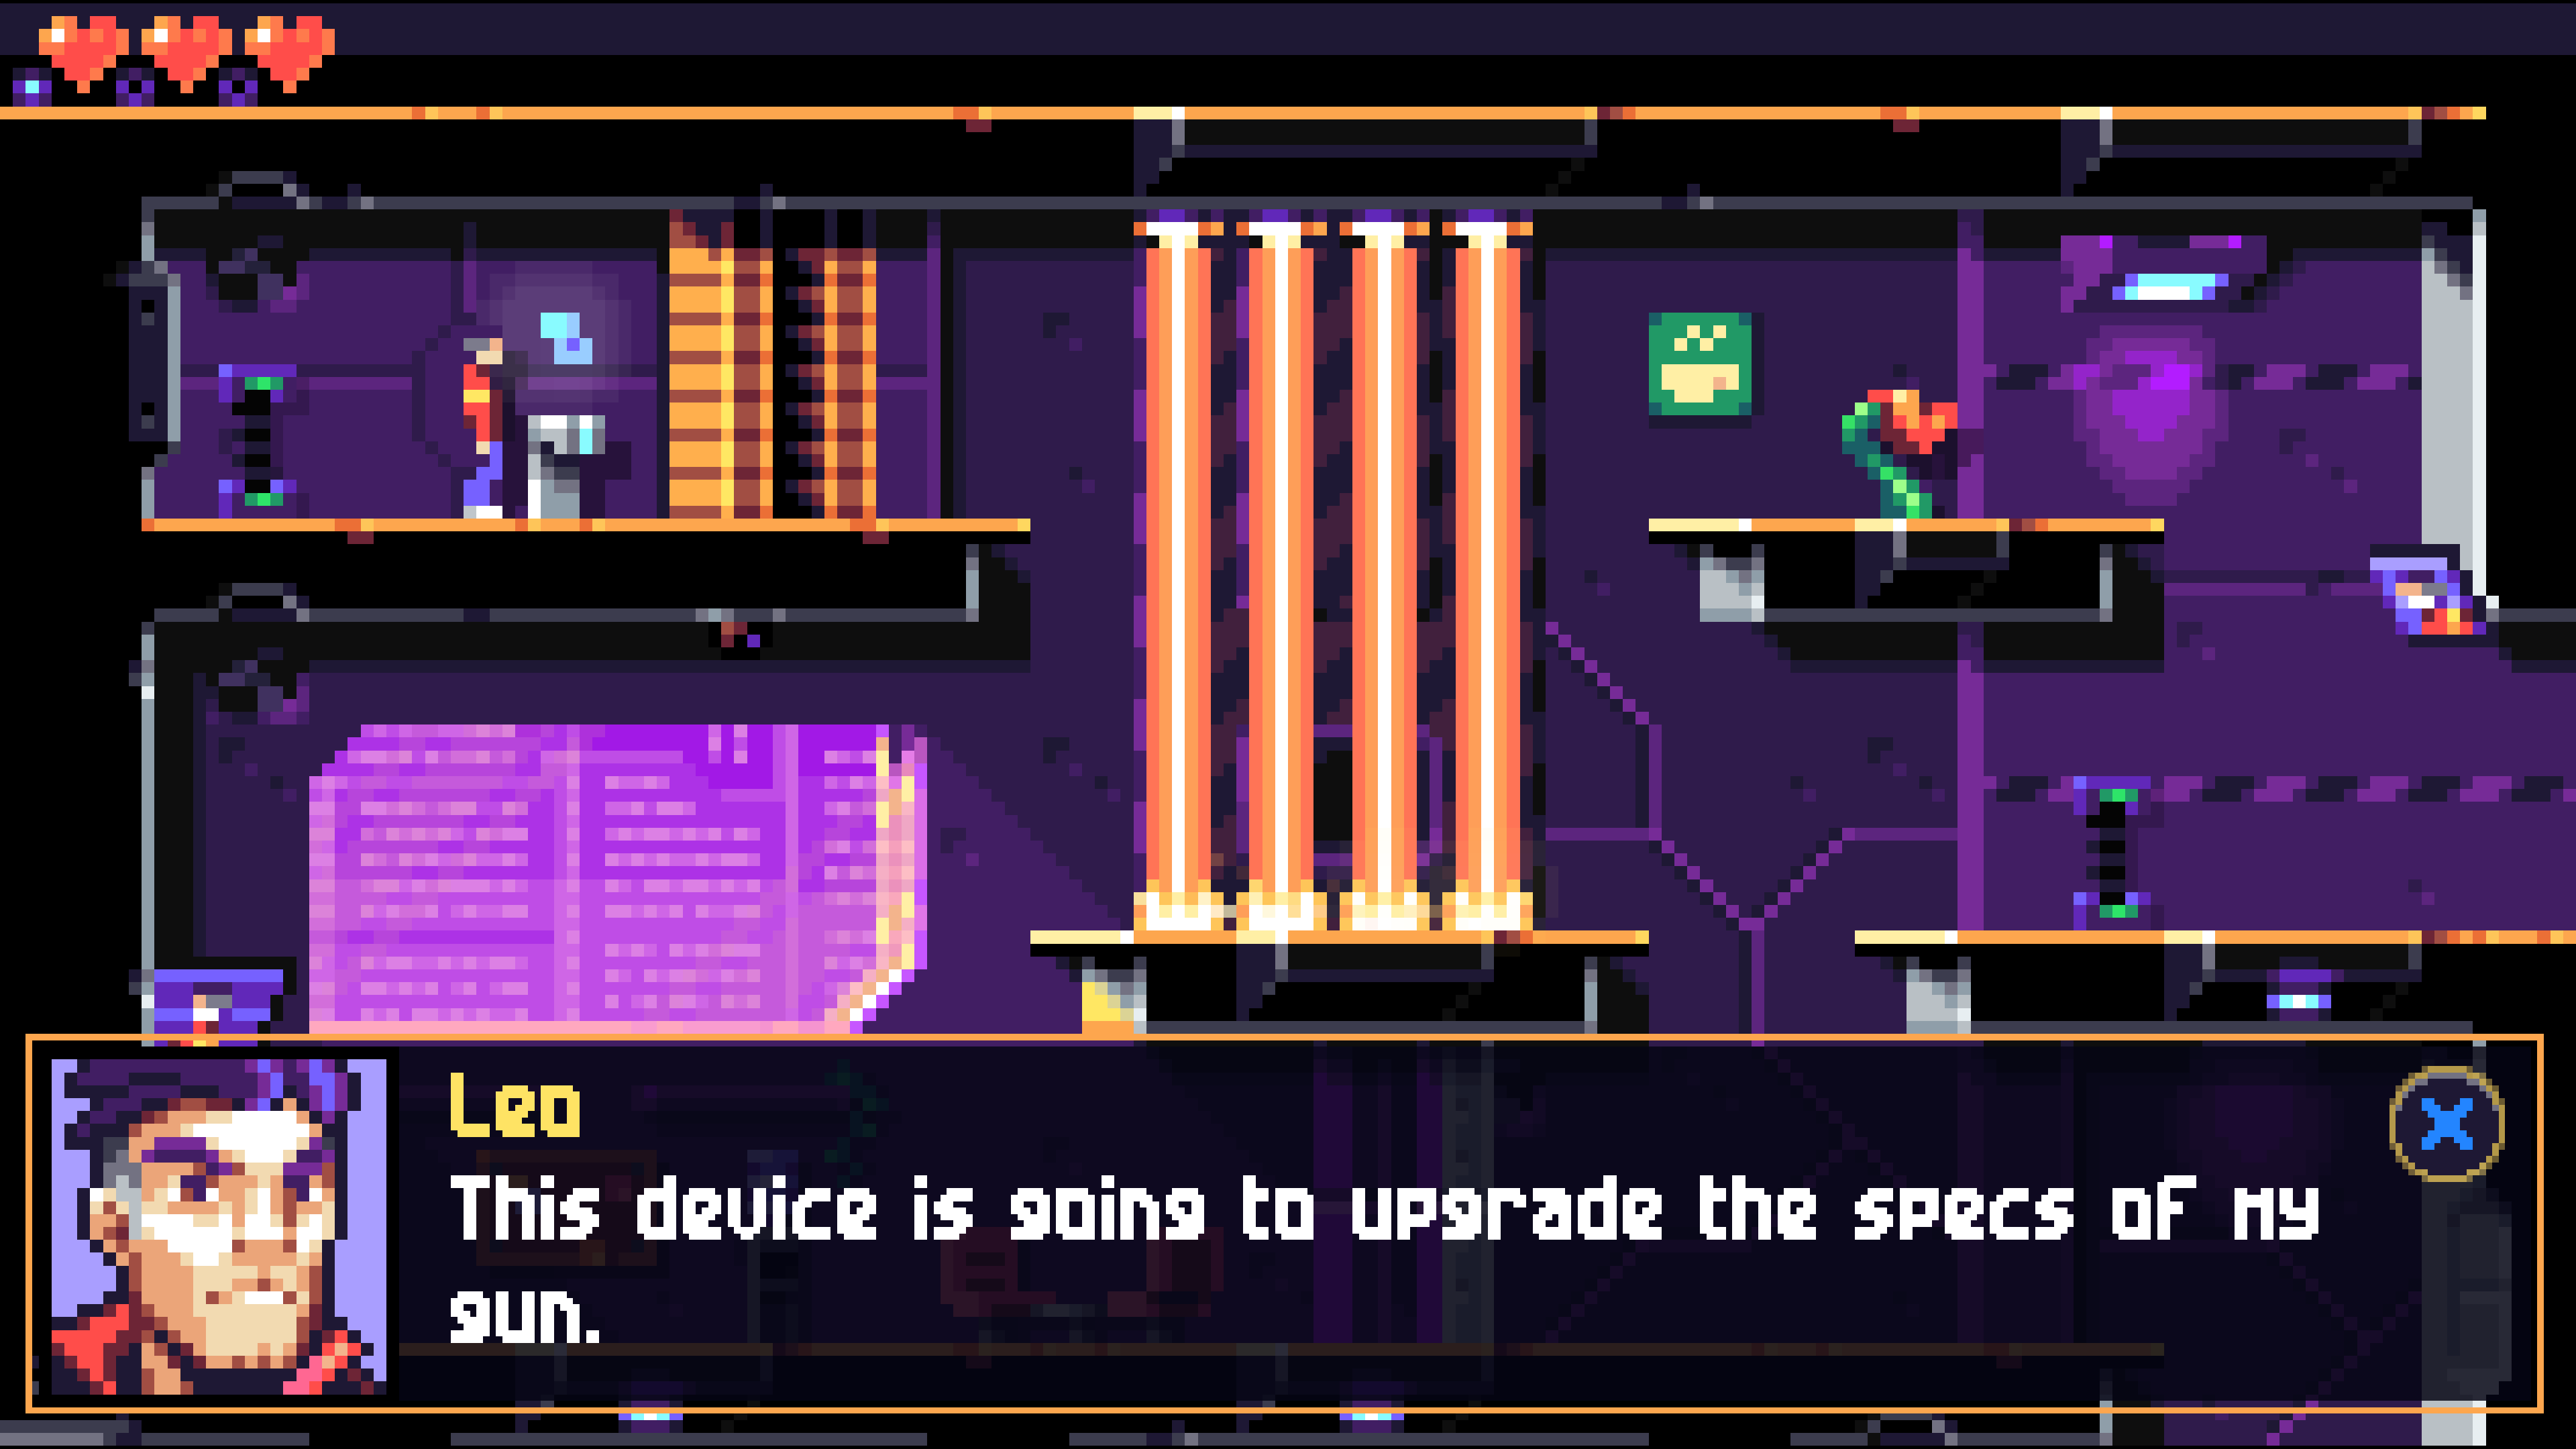 2D pixel art character wearing a red jacket stands at an upgrade terminal on an upper left platform of a level in Lunark the sci-fi cinematic platformer. A lower platform in the middle is blocked with laser beams. An upper platform on the right has a red plant that can be picked up to recover health.